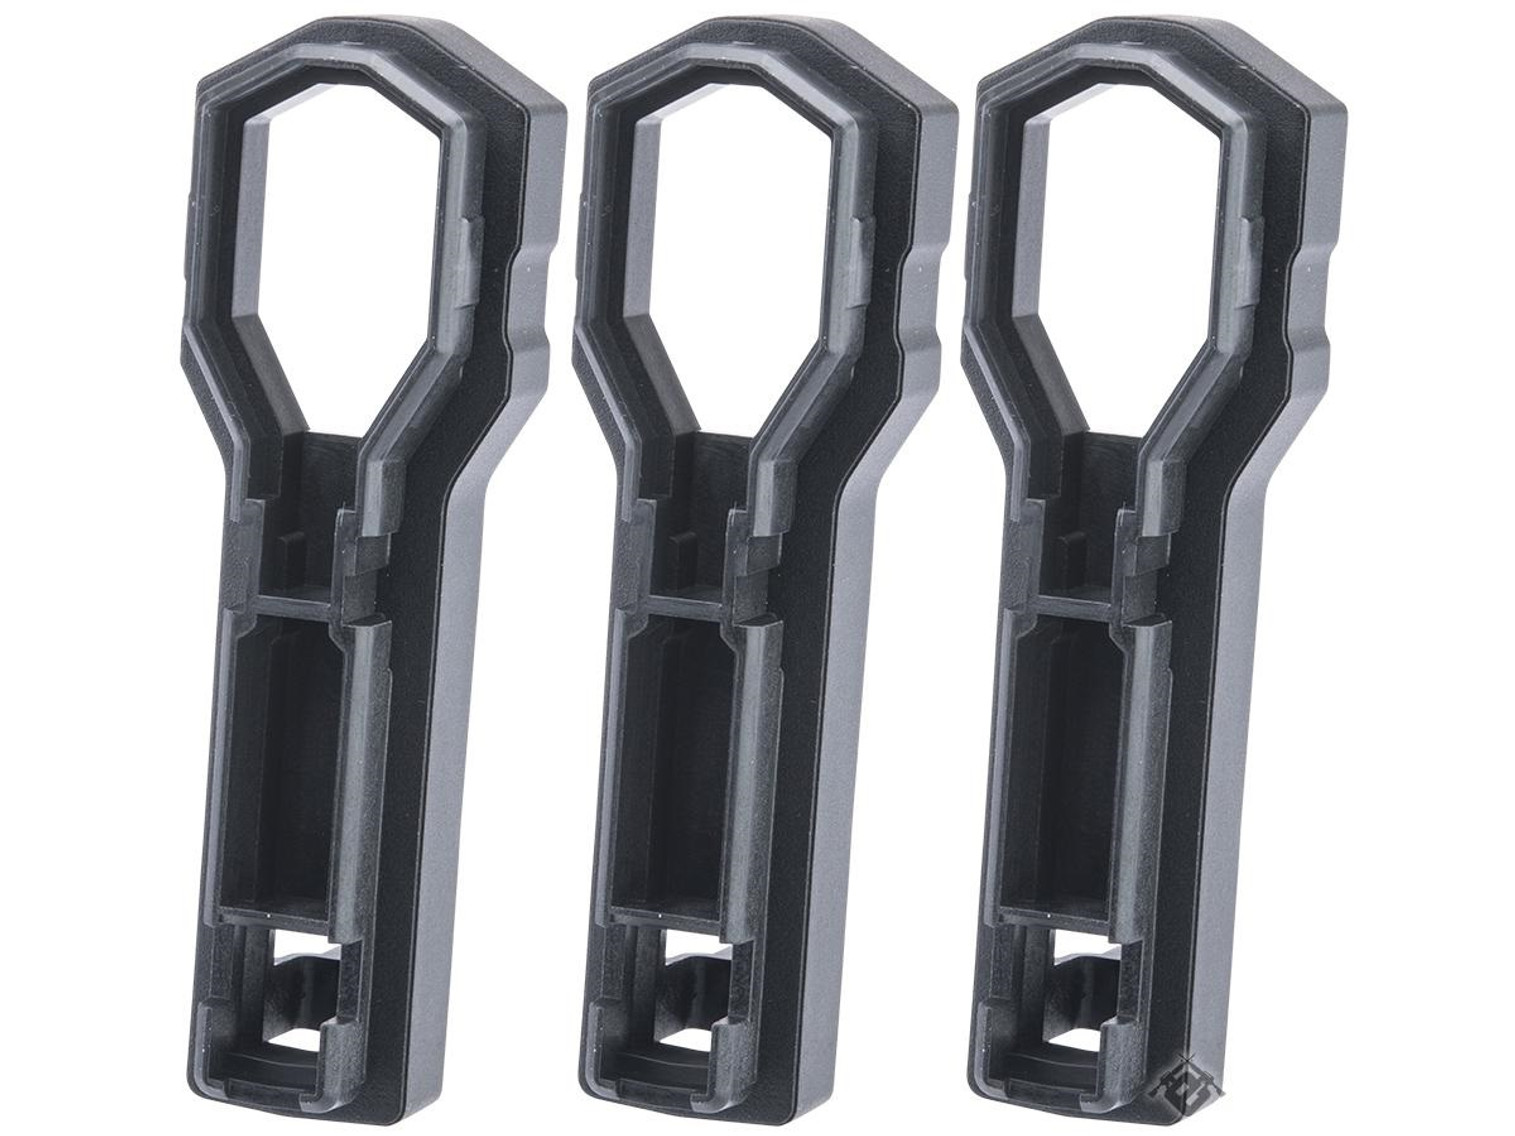 ICS TMH Buttplate Spacer Set for CXP-Tomahawk Airsoft Sniper Rifles
